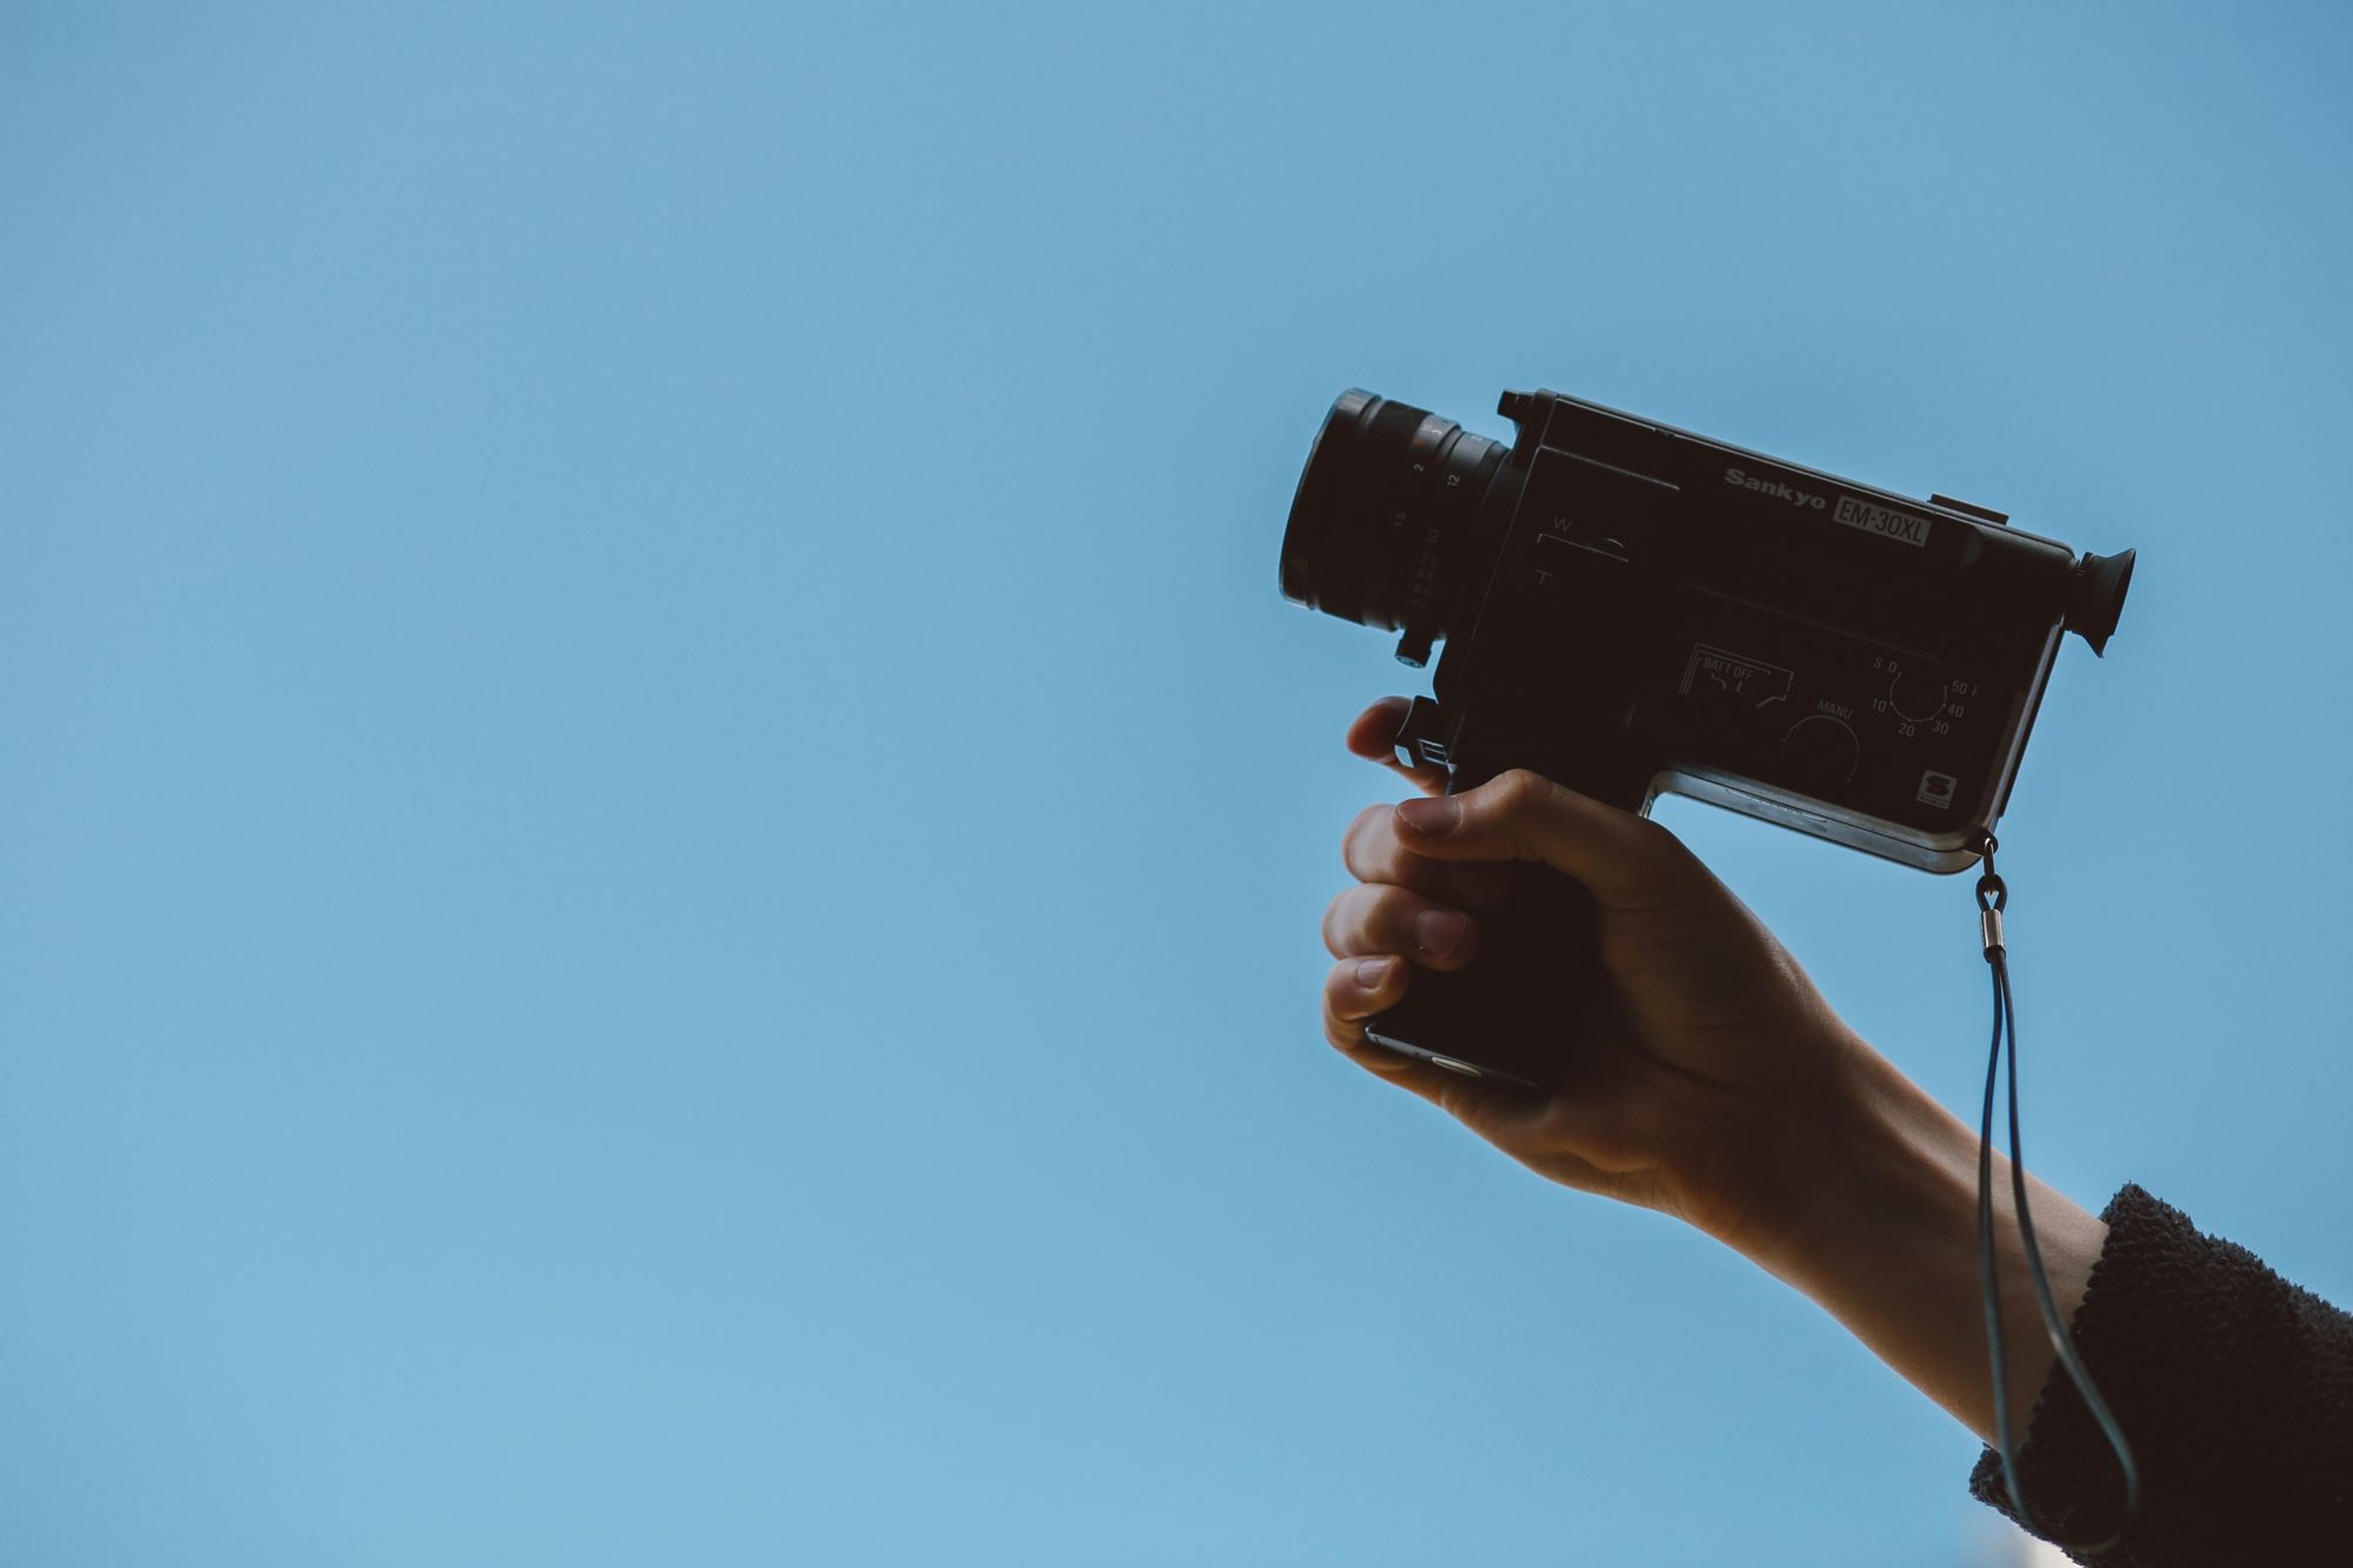 7 Winning Video Marketing Strategies You Can Implement in 2023